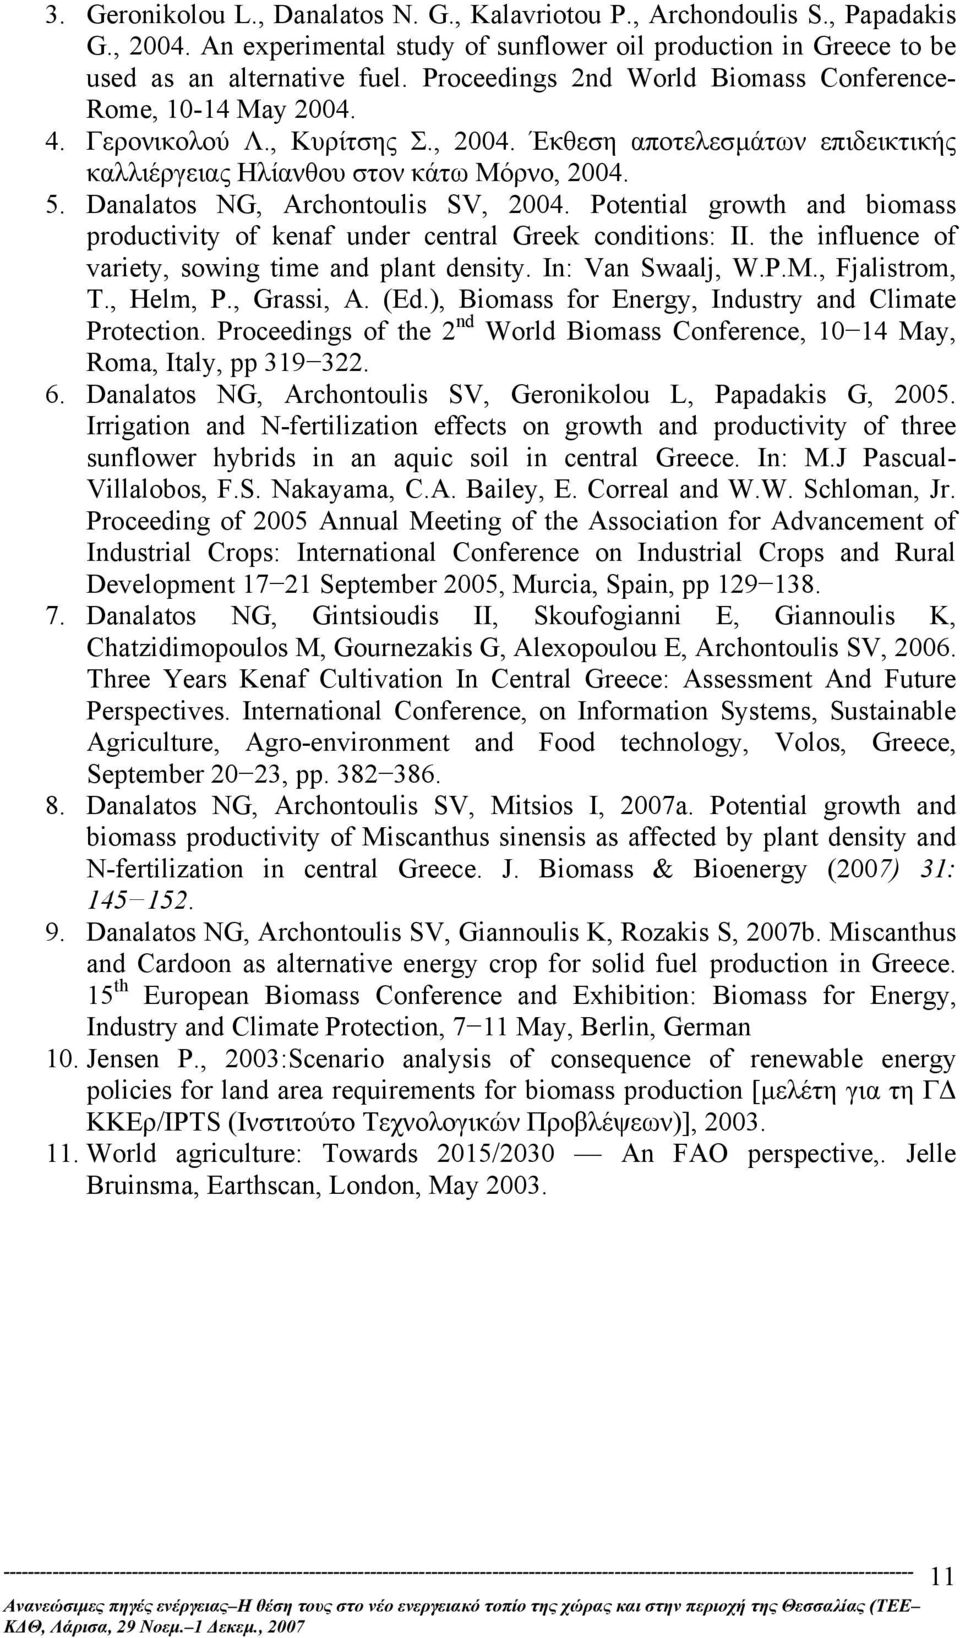 Danalatos NG, Archontoulis SV, 2004. Potential growth and biomass productivity of kenaf under central Greek conditions: II. the influence of variety, sowing time and plant density. In: Van Swaalj, W.